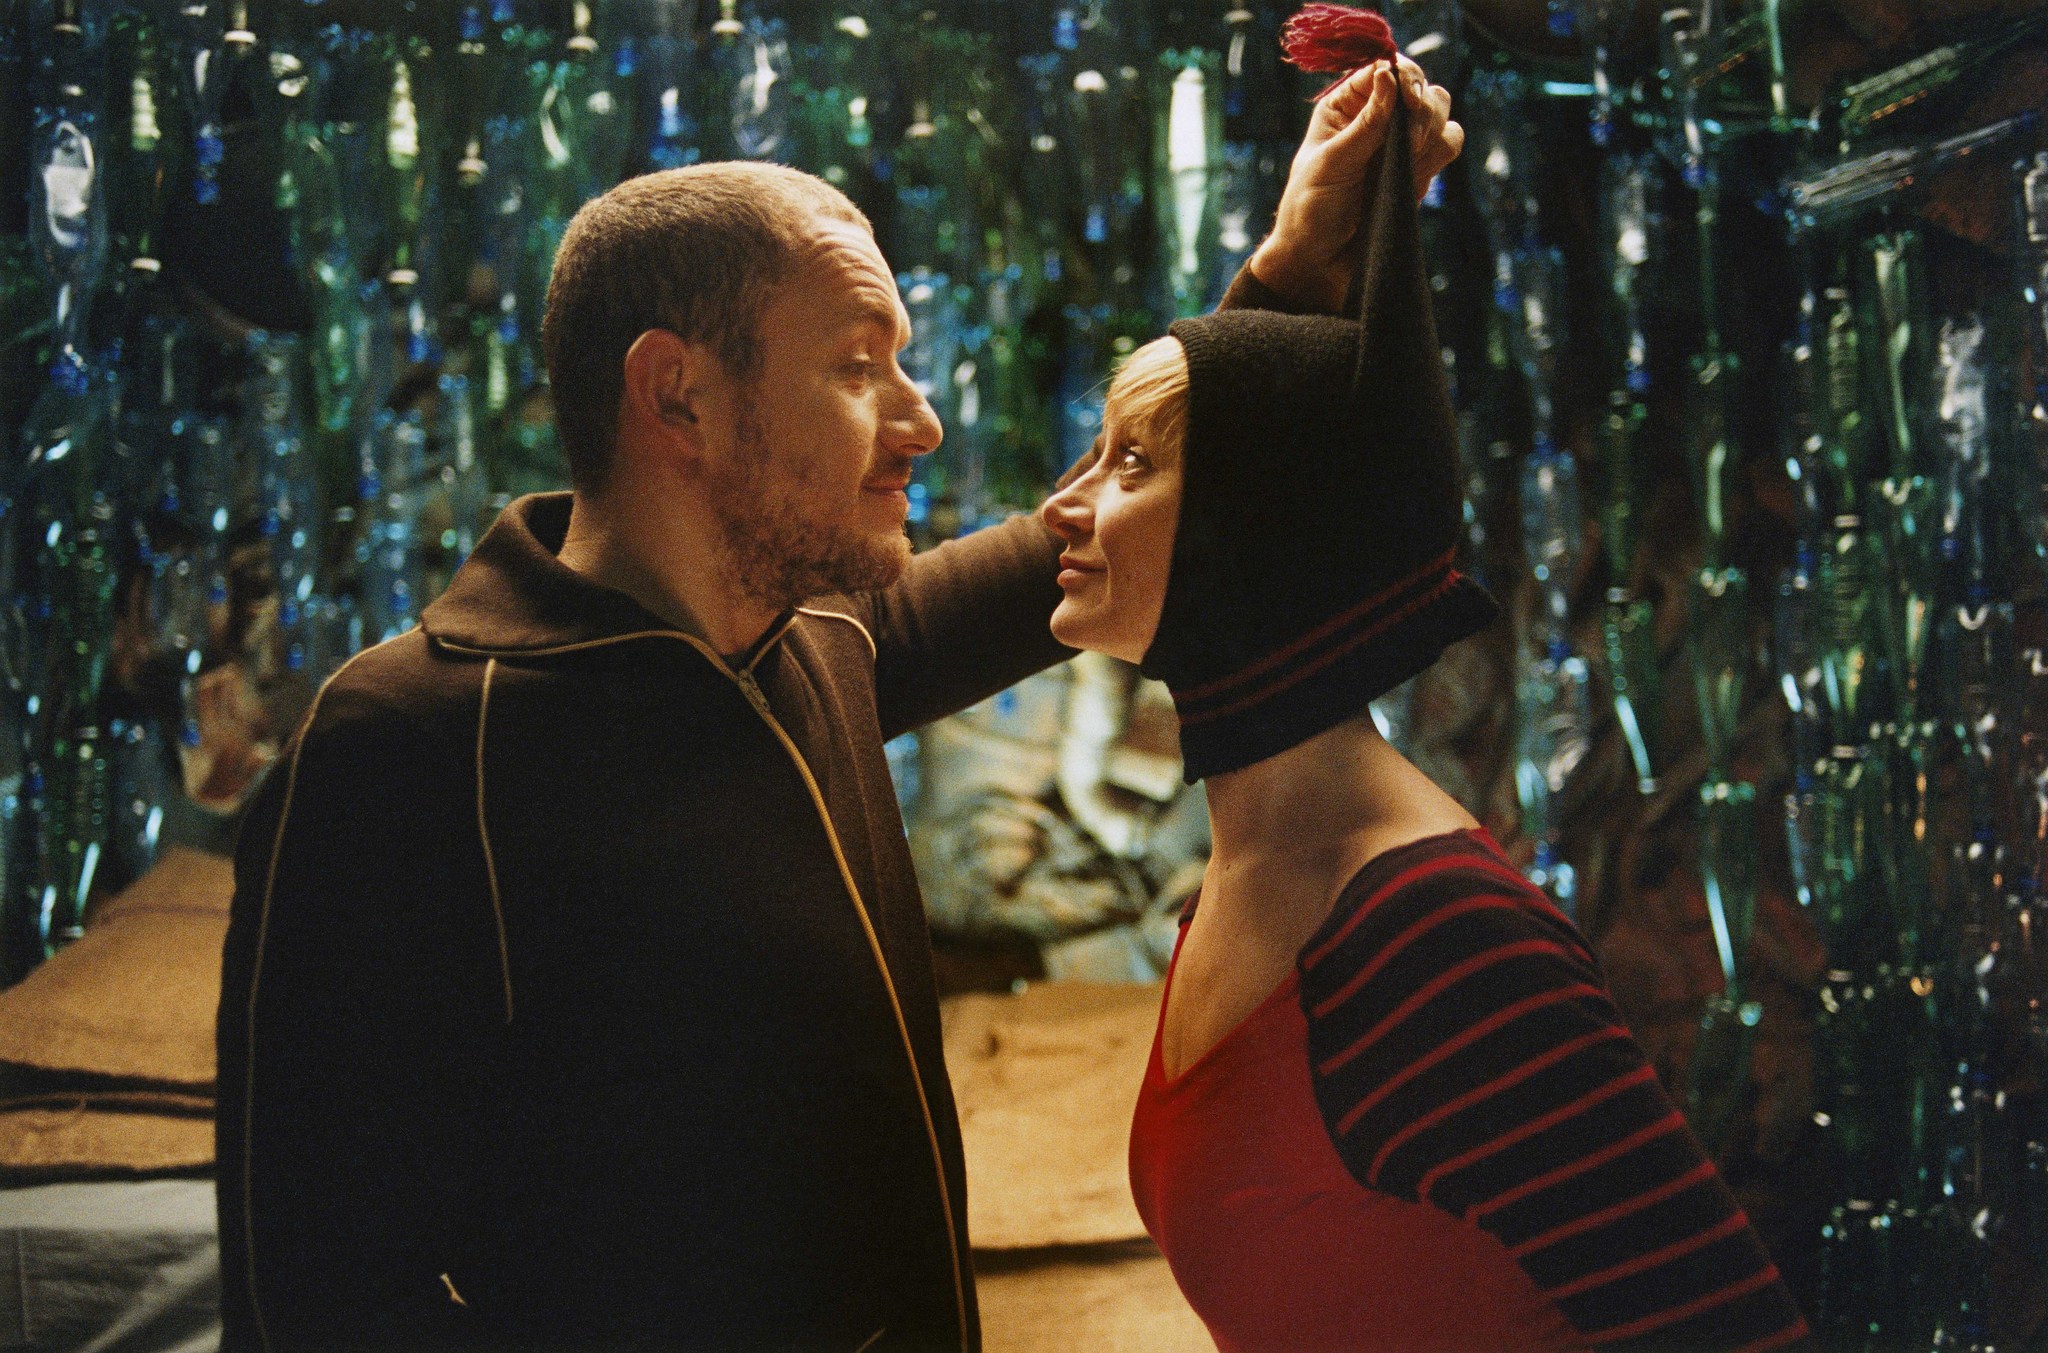 Still of Dany Boon and Julie Ferrier in Micmacs à tire-larigot (2009)